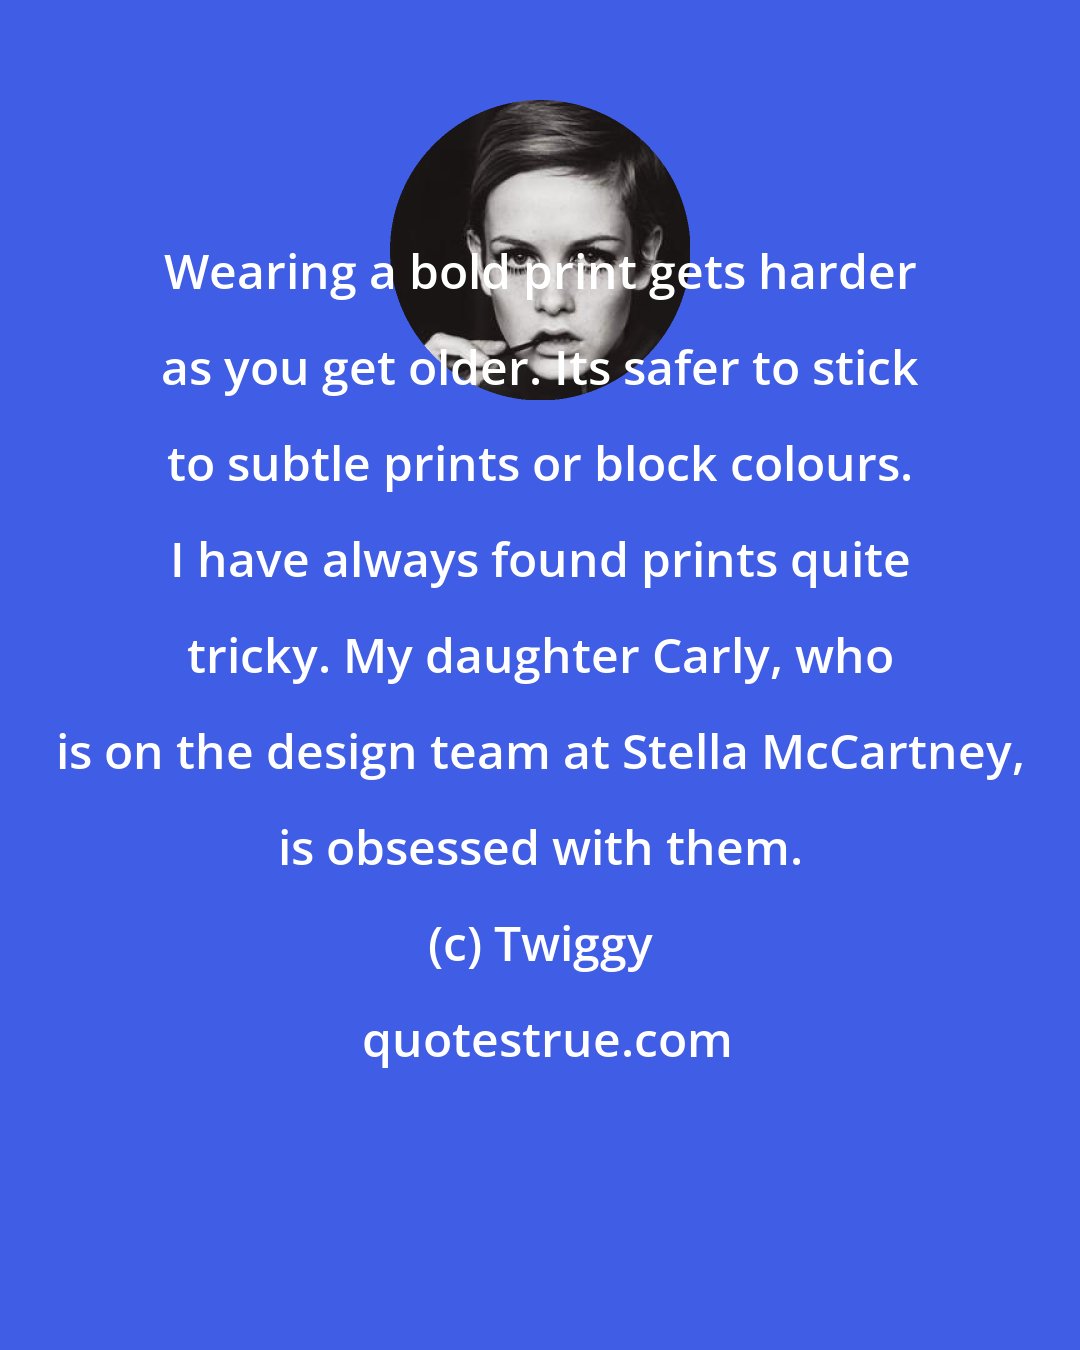 Twiggy: Wearing a bold print gets harder as you get older. Its safer to stick to subtle prints or block colours. I have always found prints quite tricky. My daughter Carly, who is on the design team at Stella McCartney, is obsessed with them.